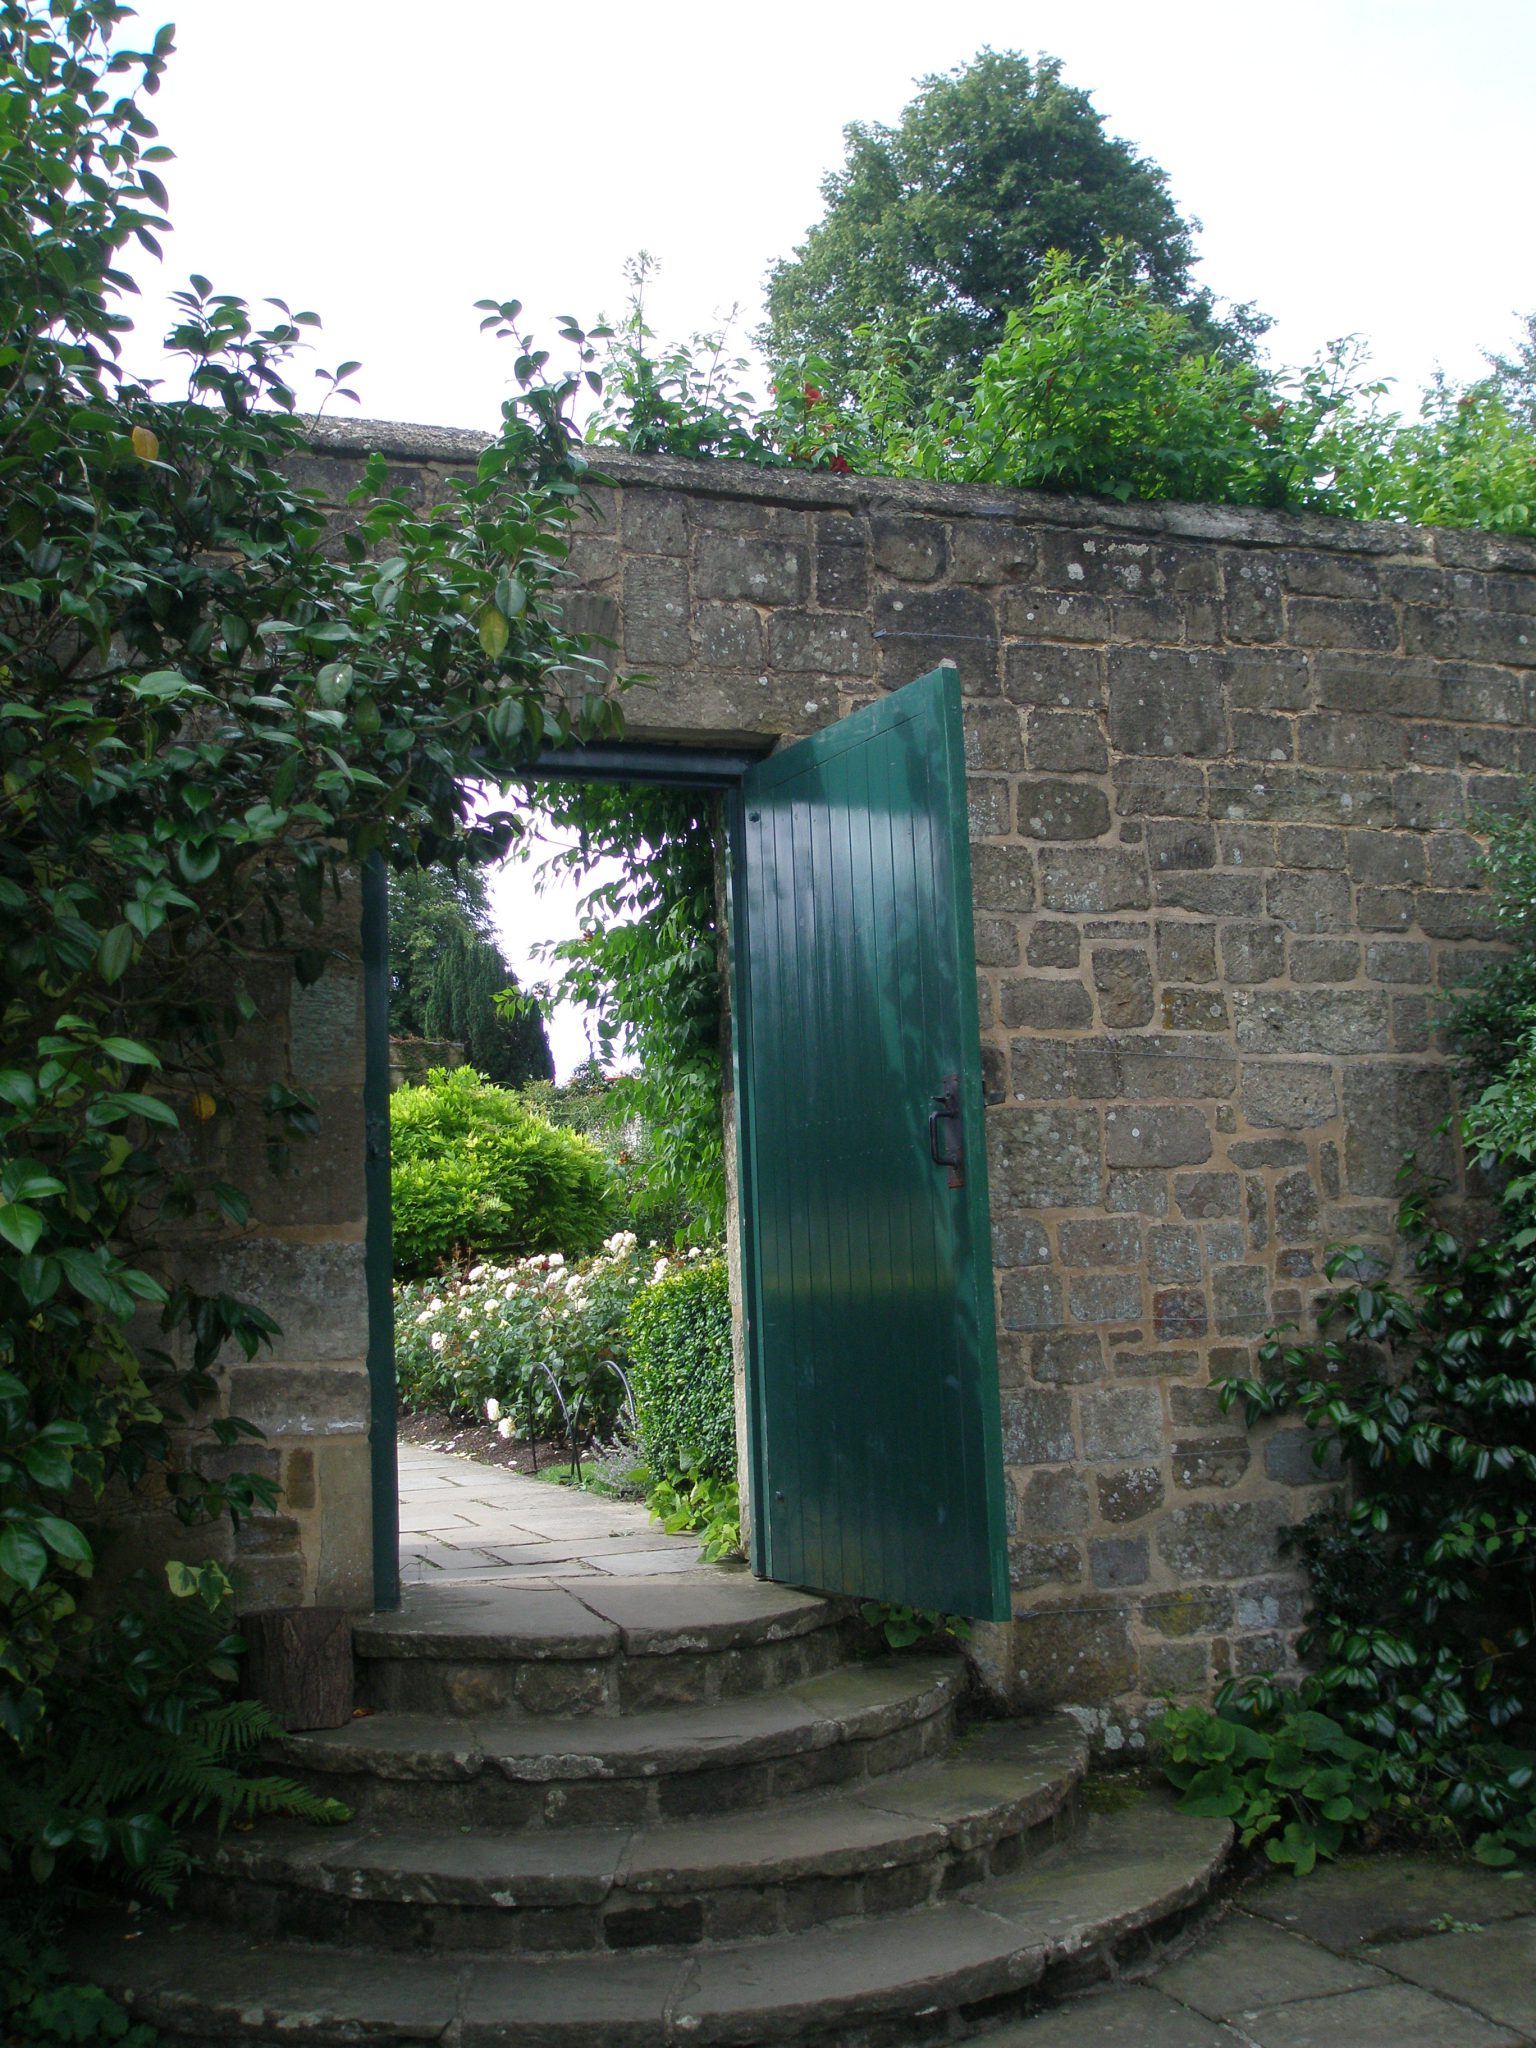 We enter Charwell through this Gate, which leads into Lady Churchill's Rose Garden.